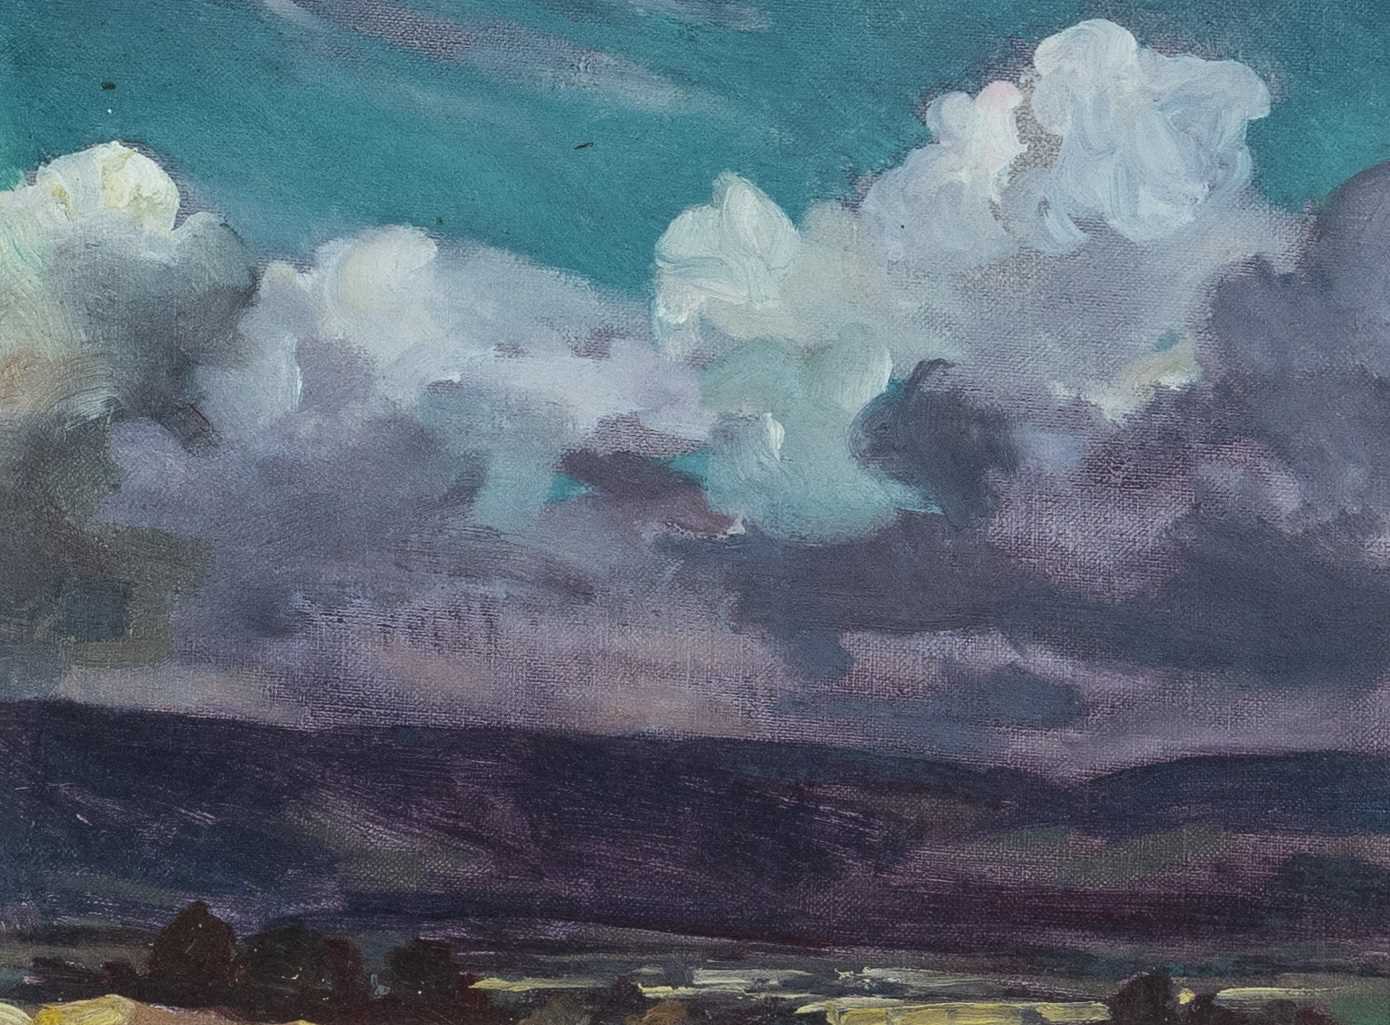 CHRISTOPHER WILLIAMS RBA (Welsh 1873-1934) oil on canvas - entitled verso 'Cloud Study over